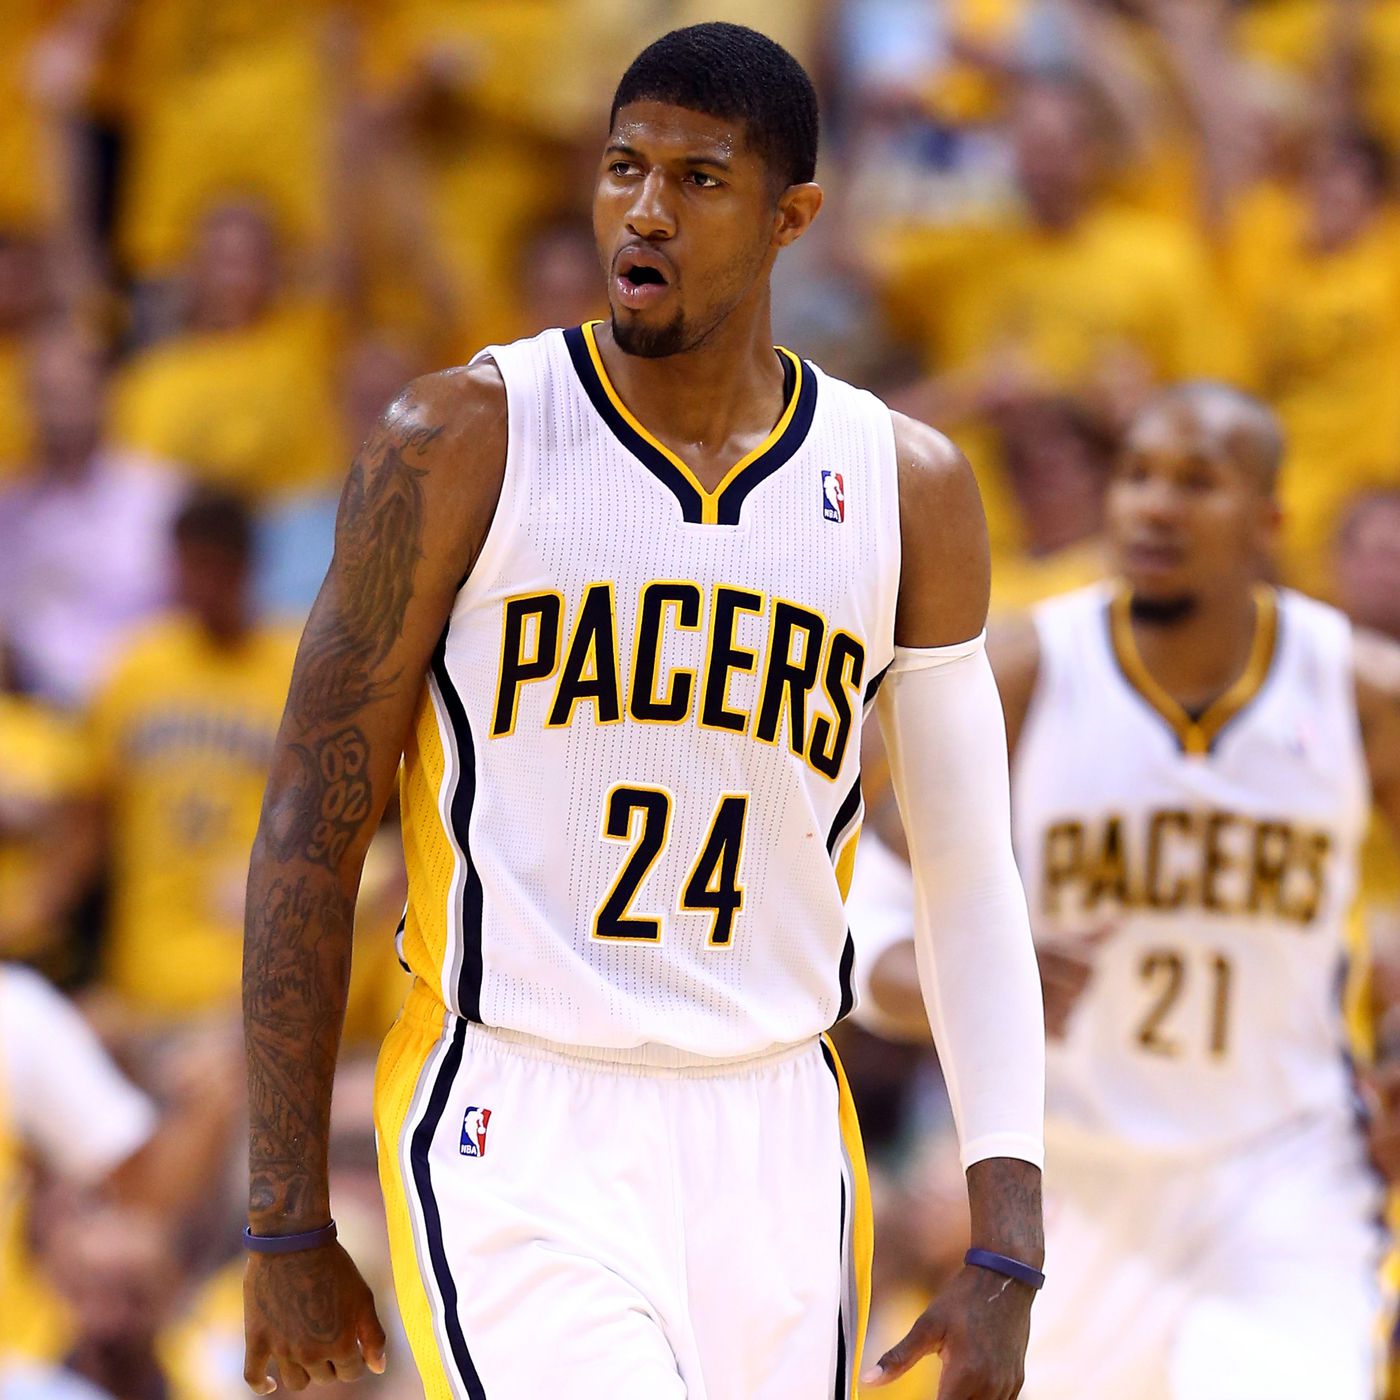 paul george pacers 24 jersey